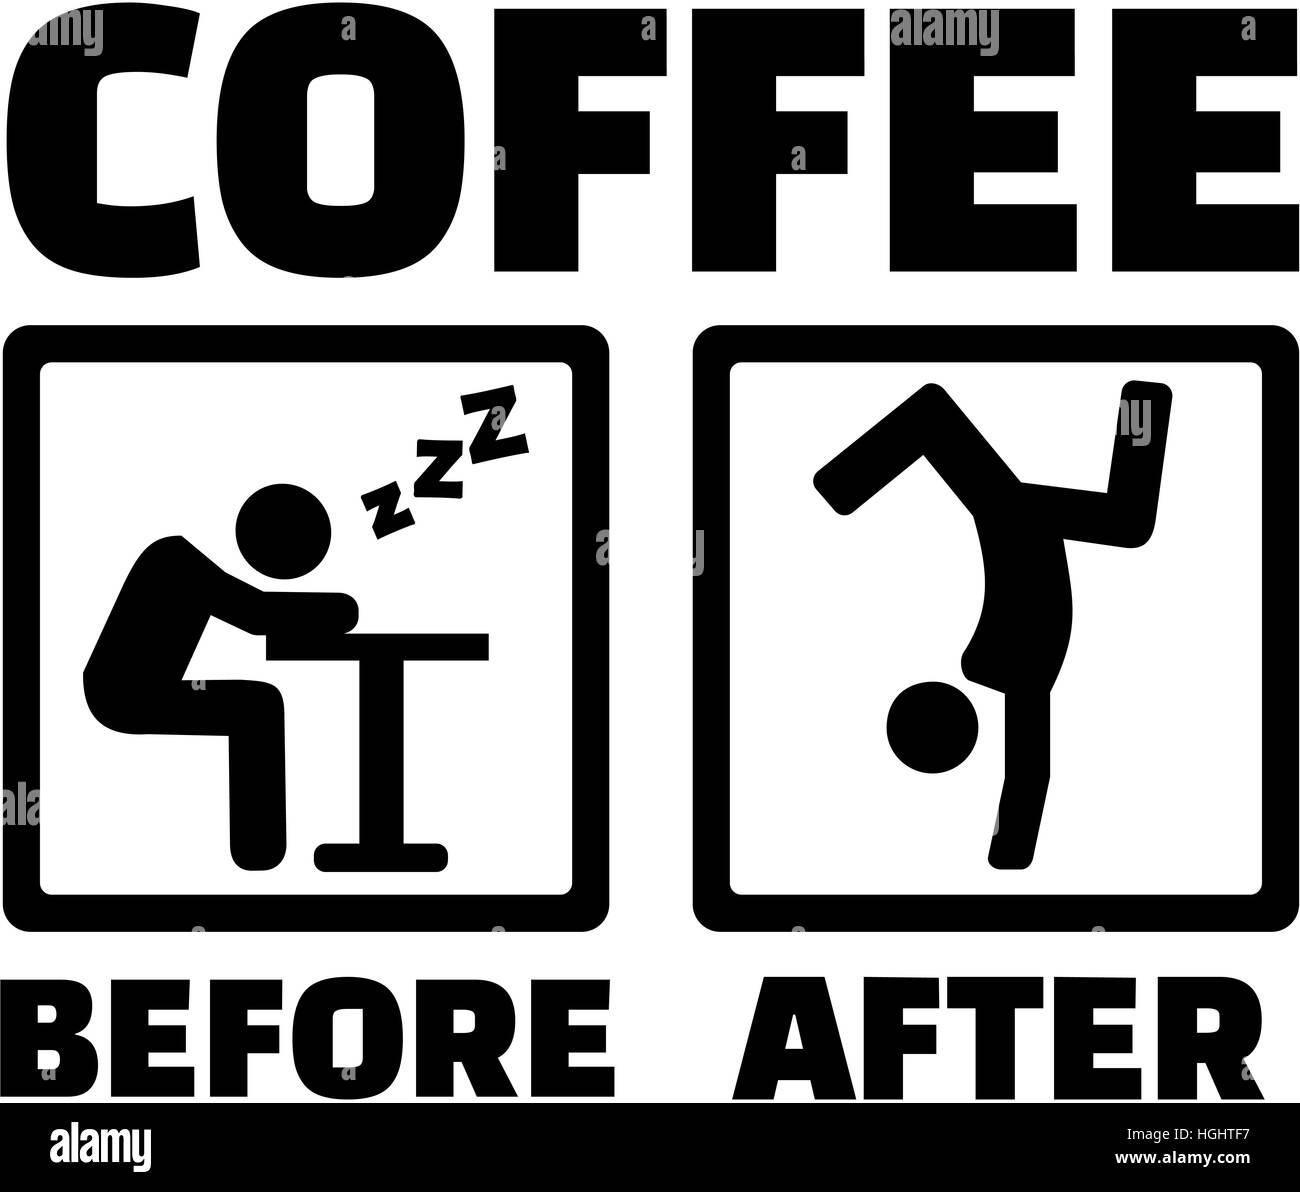 Coffee process - befor and after caffeine Stock Photo